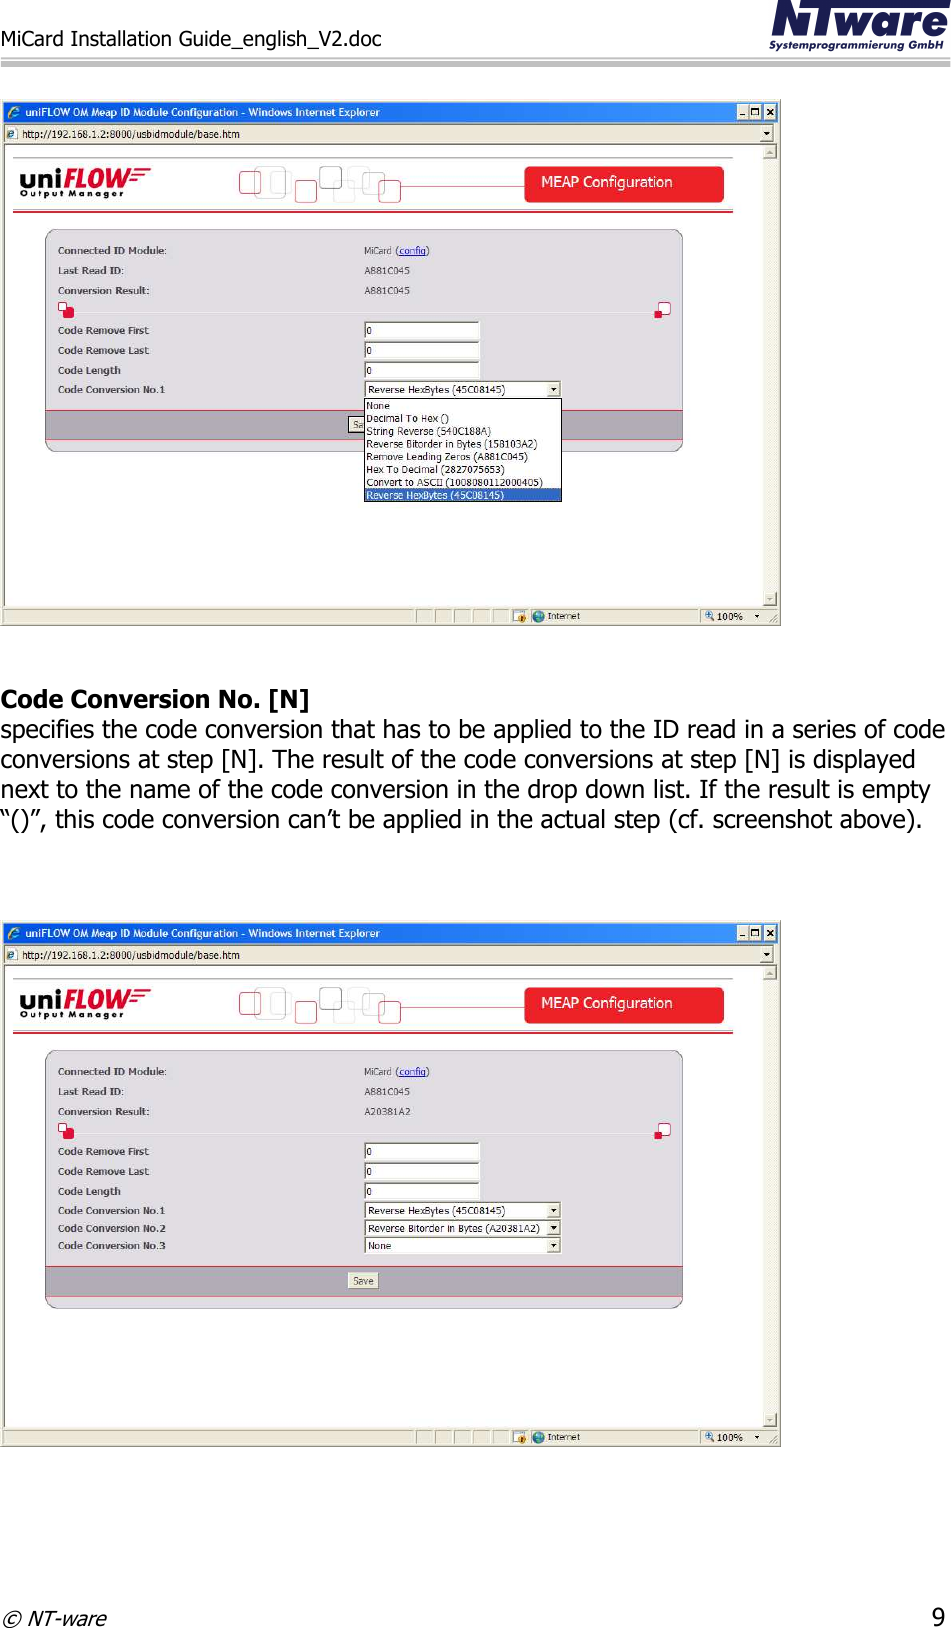 MiCard Installation Guide_english_V2.doc     © NT-ware 9     Code Conversion No. [N]  specifies the code conversion that has to be applied to the ID read in a series of code conversions at step [N]. The result of the code conversions at step [N] is displayed next to the name of the code conversion in the drop down list. If the result is empty “()”, this code conversion can’t be applied in the actual step (cf. screenshot above).       